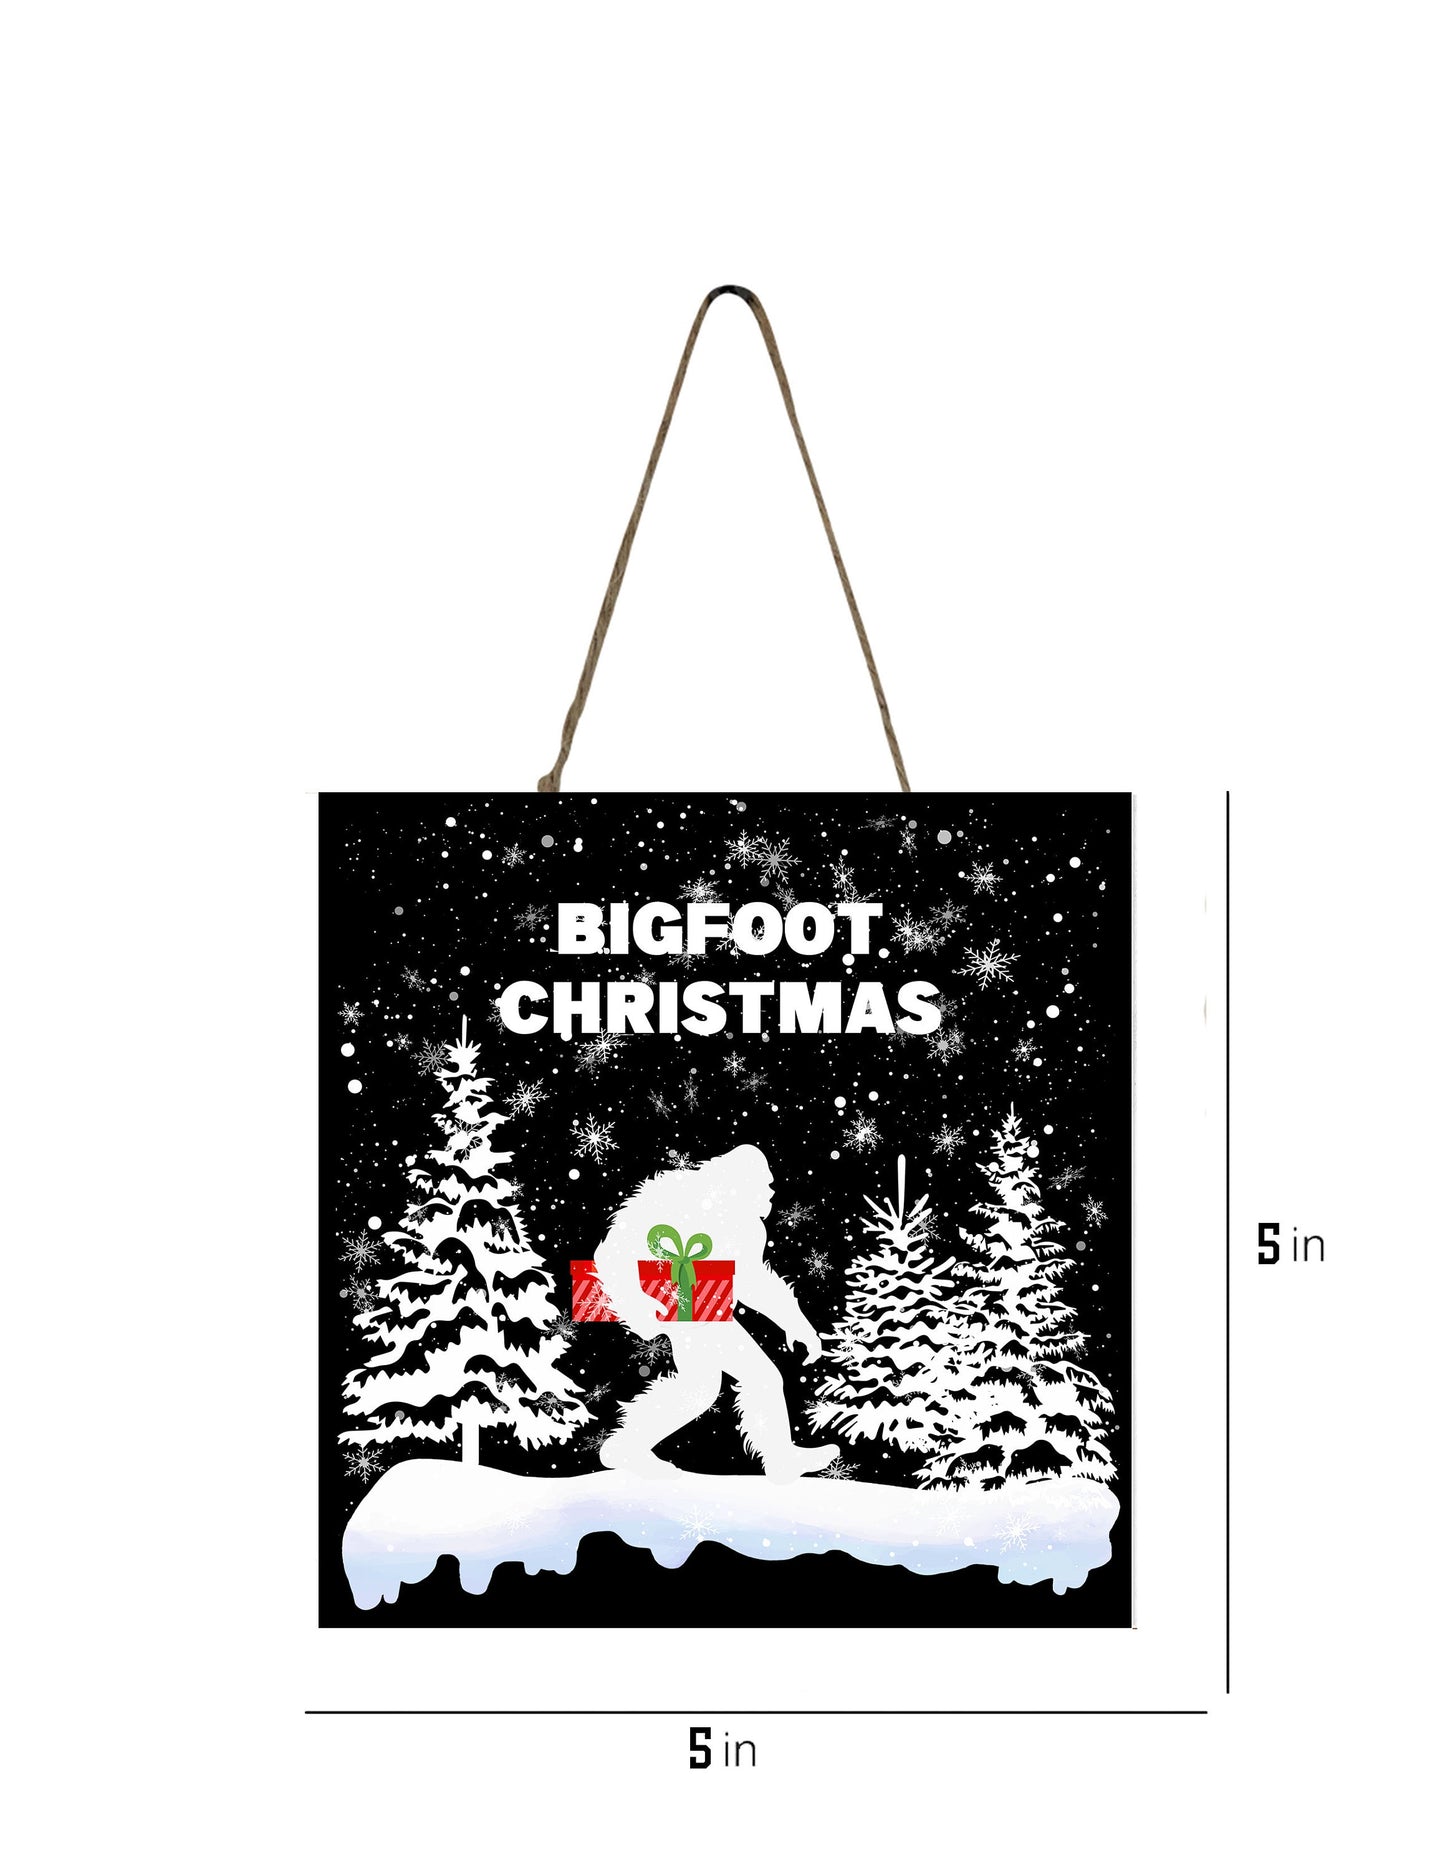 New Release, Christmas Ornament, Black and White Bigfoot Christmas, Tier Tray Decor, Wreath Sign, Mini Sign, Door Hanger